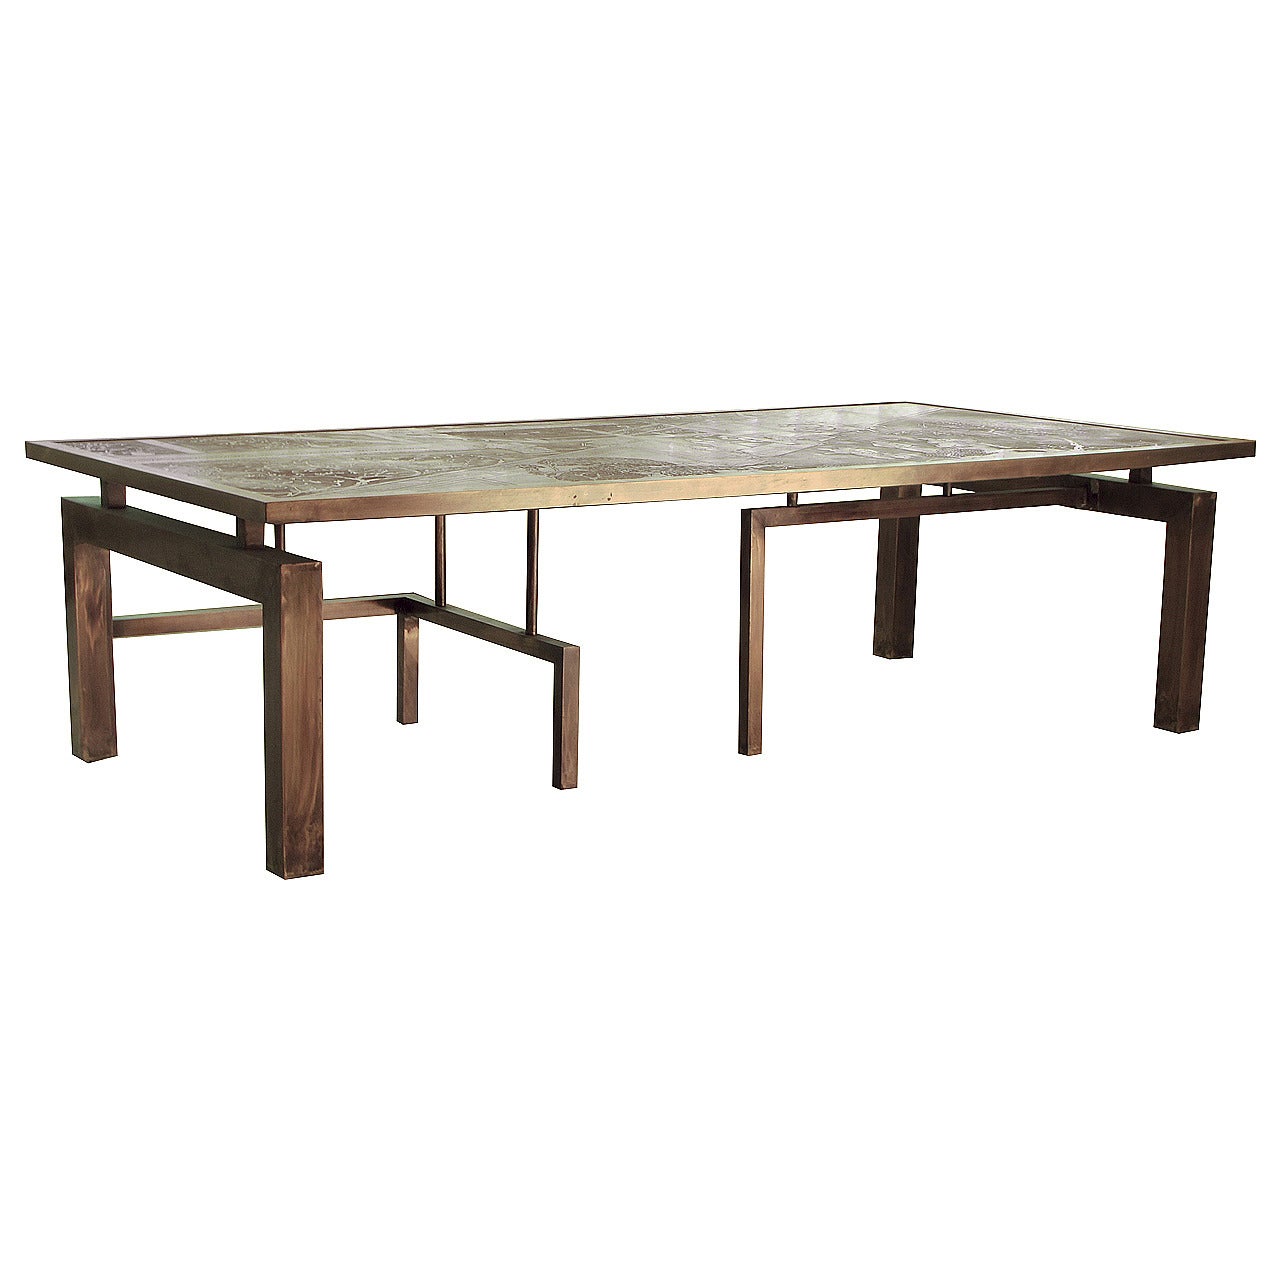 Rare Architectural "Medici" Coffee Table by Philip and Kelvin LaVerne, NYC